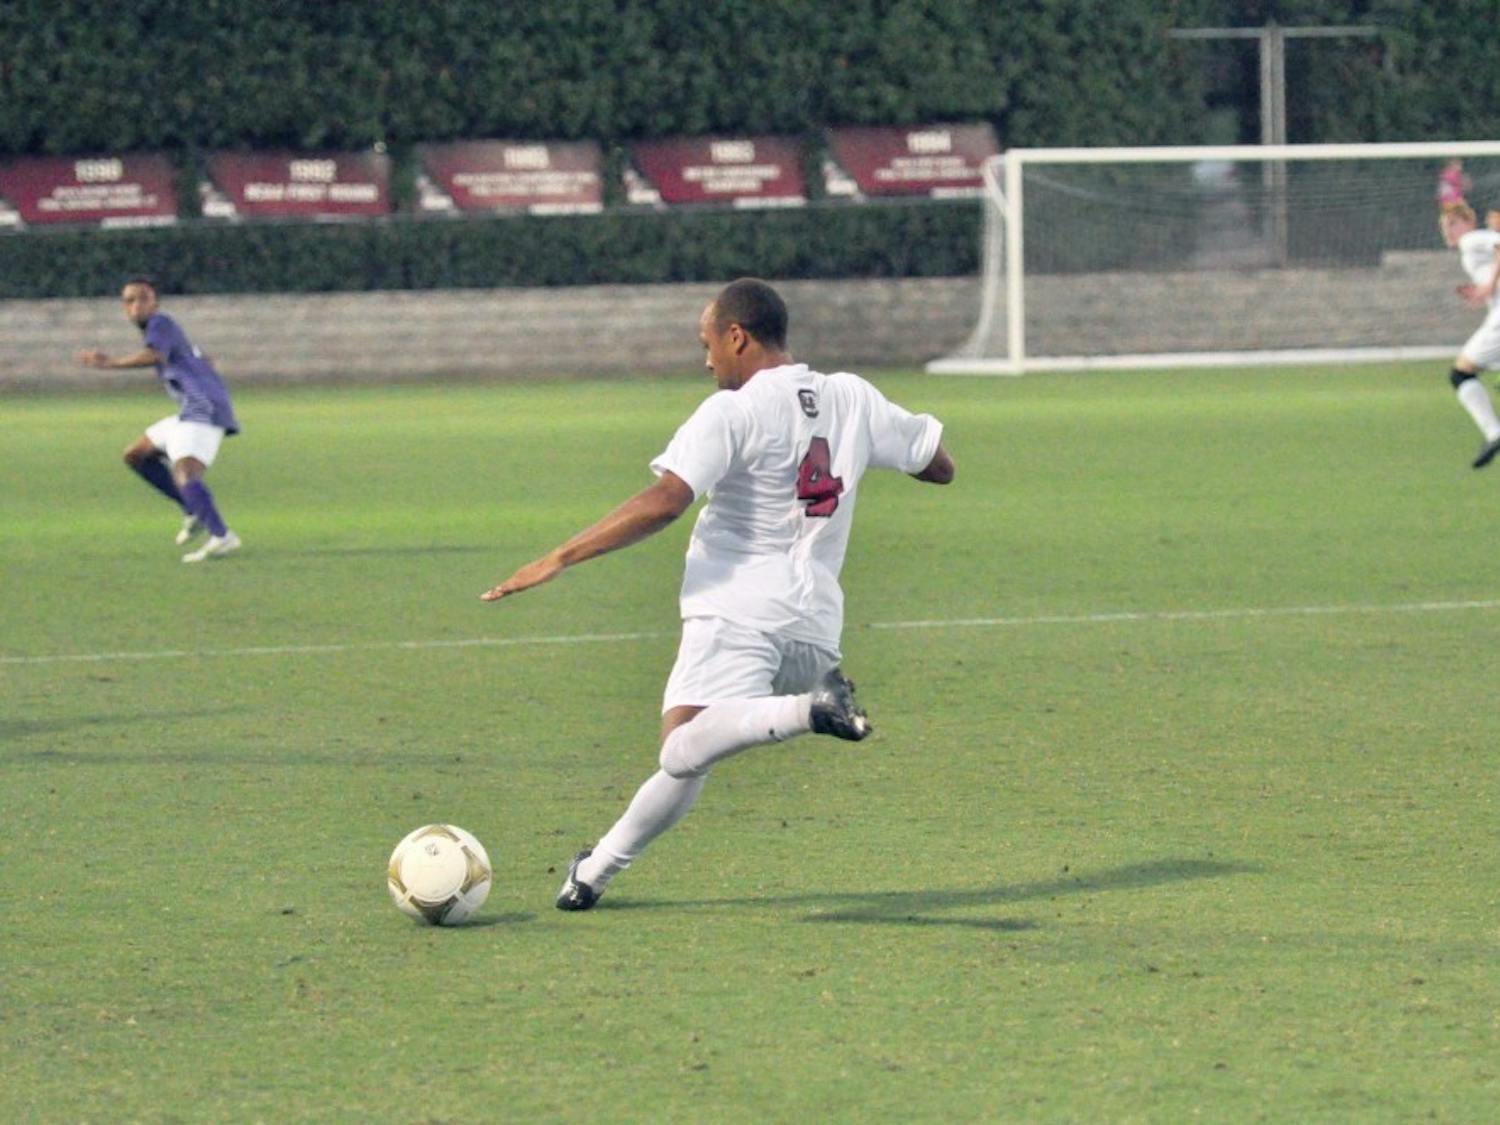 	Freshman Ive Burnett scored the first goal of his career in South Carolina’s last match, netting the Gamecocks’ only score in the team’s 3-1 loss at Coastal Carolina Tuesday.